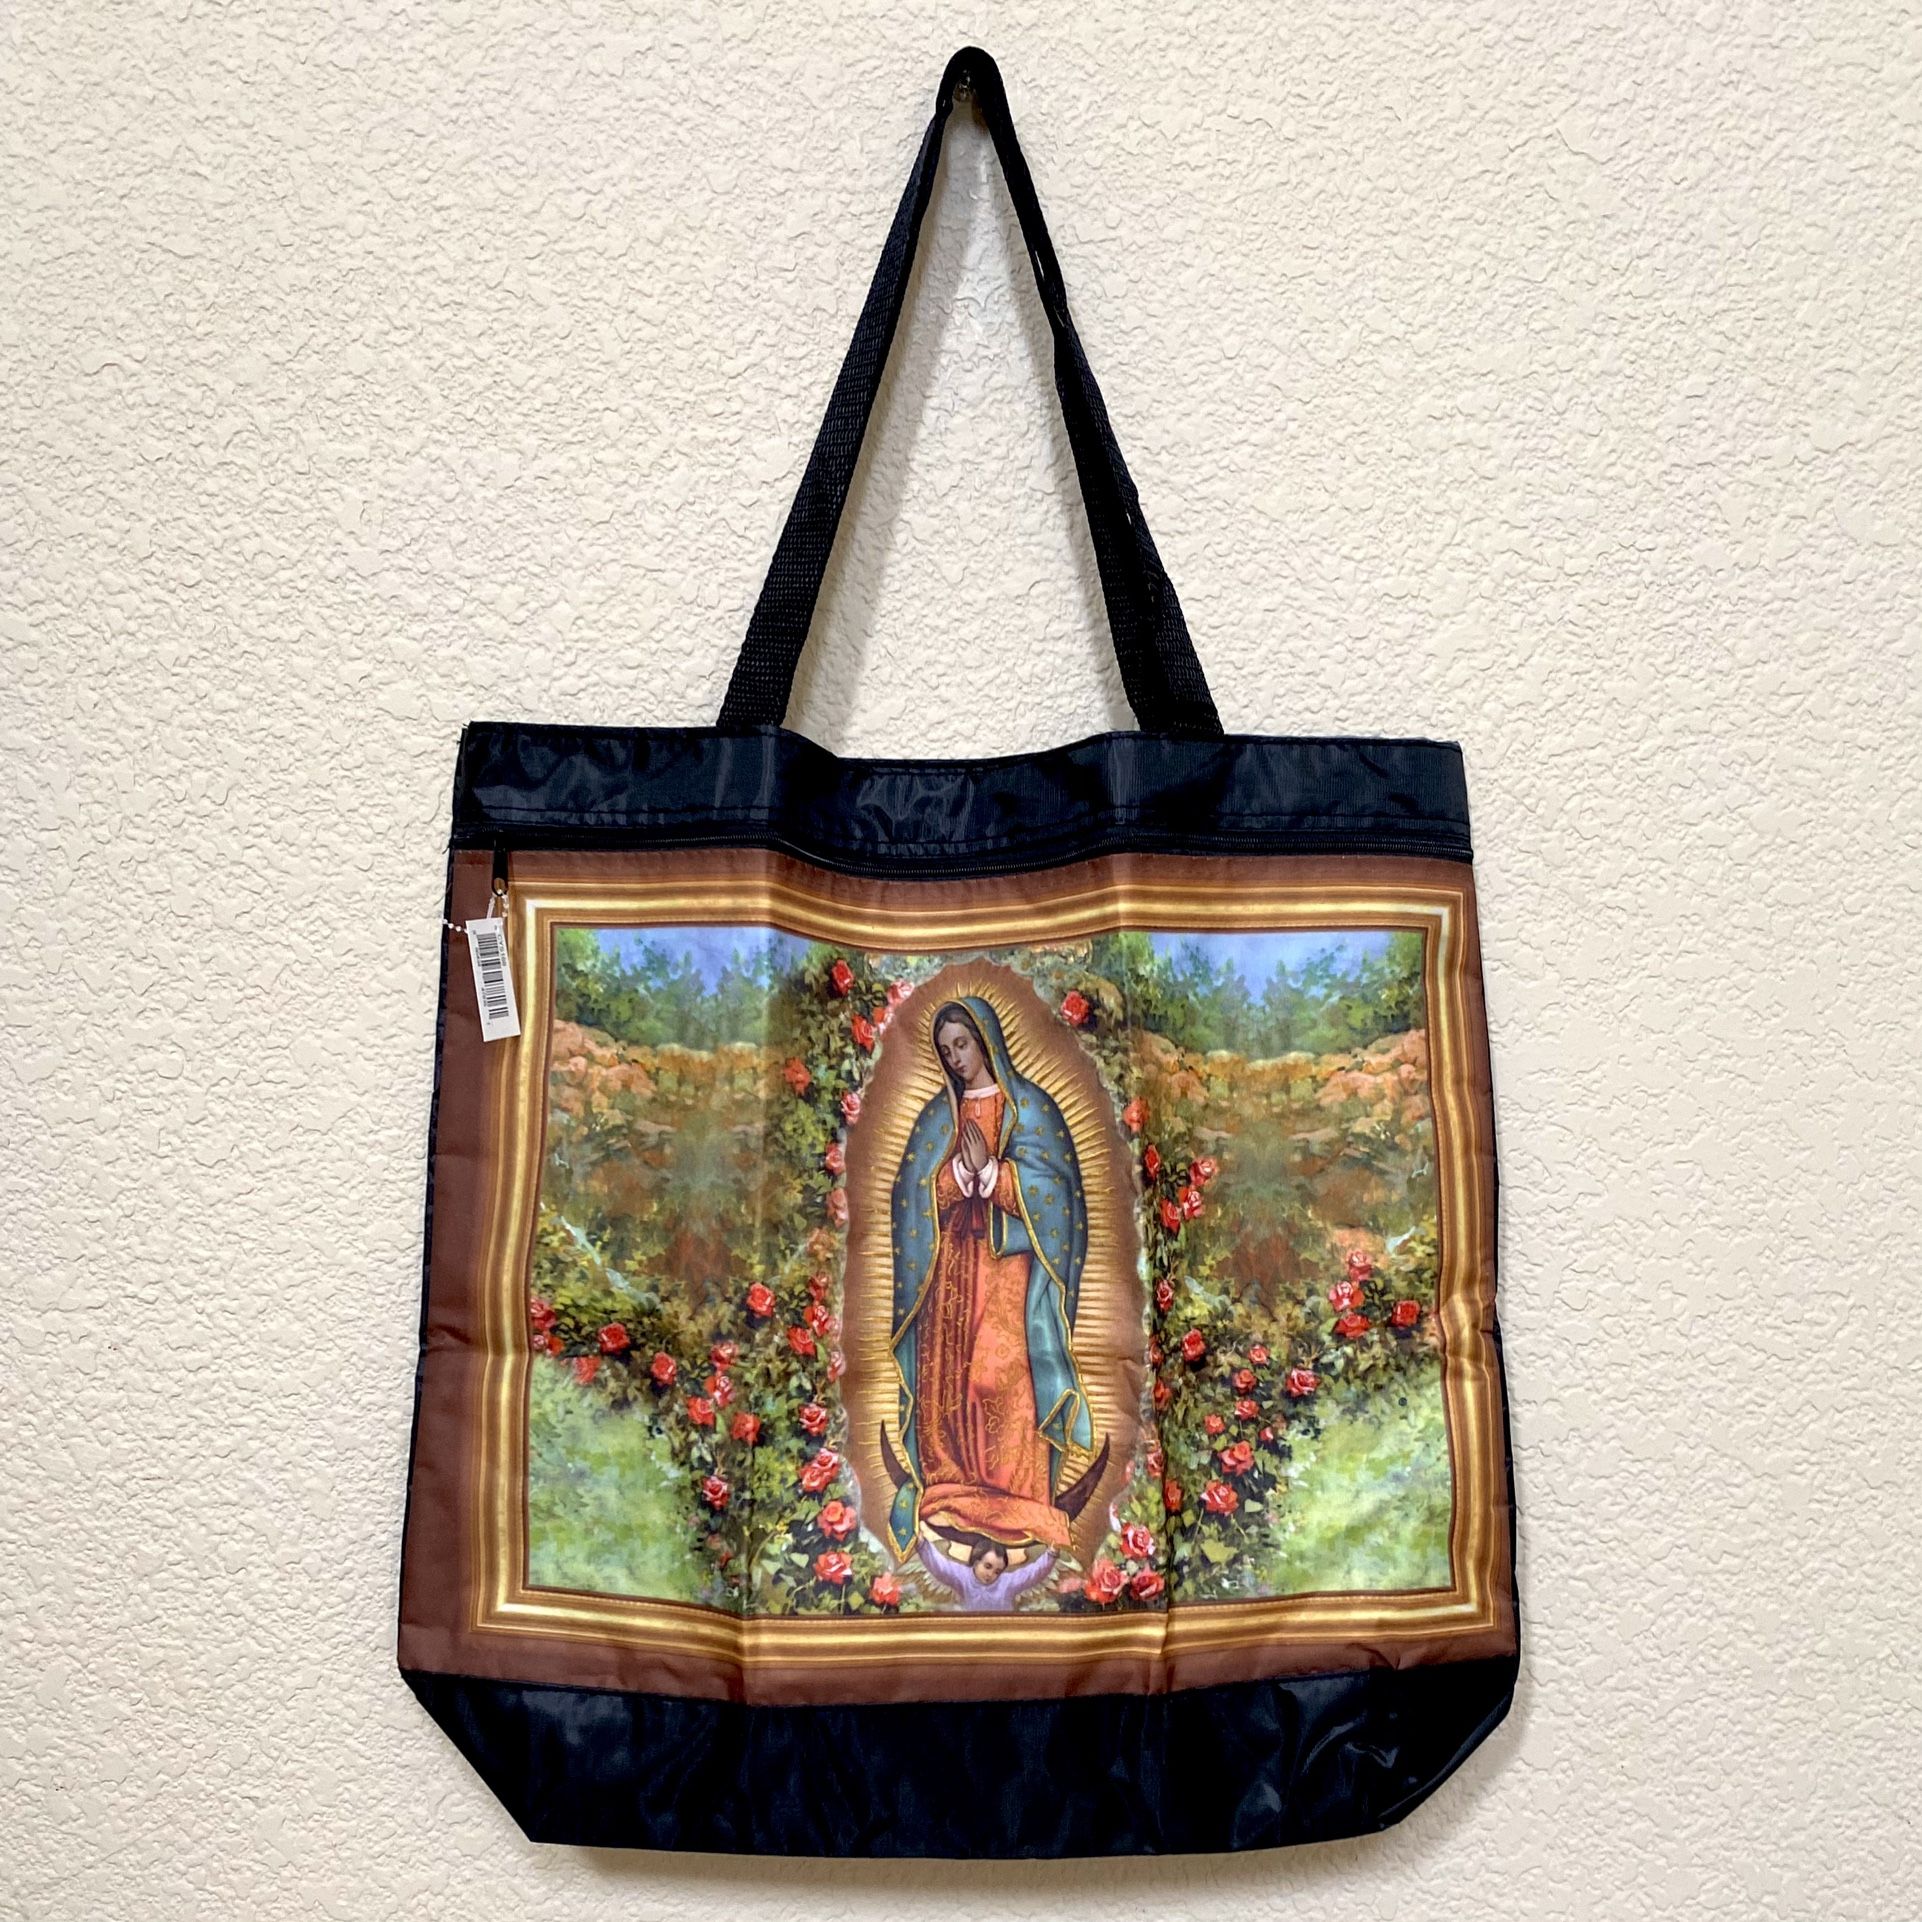 Our Lady of Guadalupe Tote Bag Mother’s Day Gift 